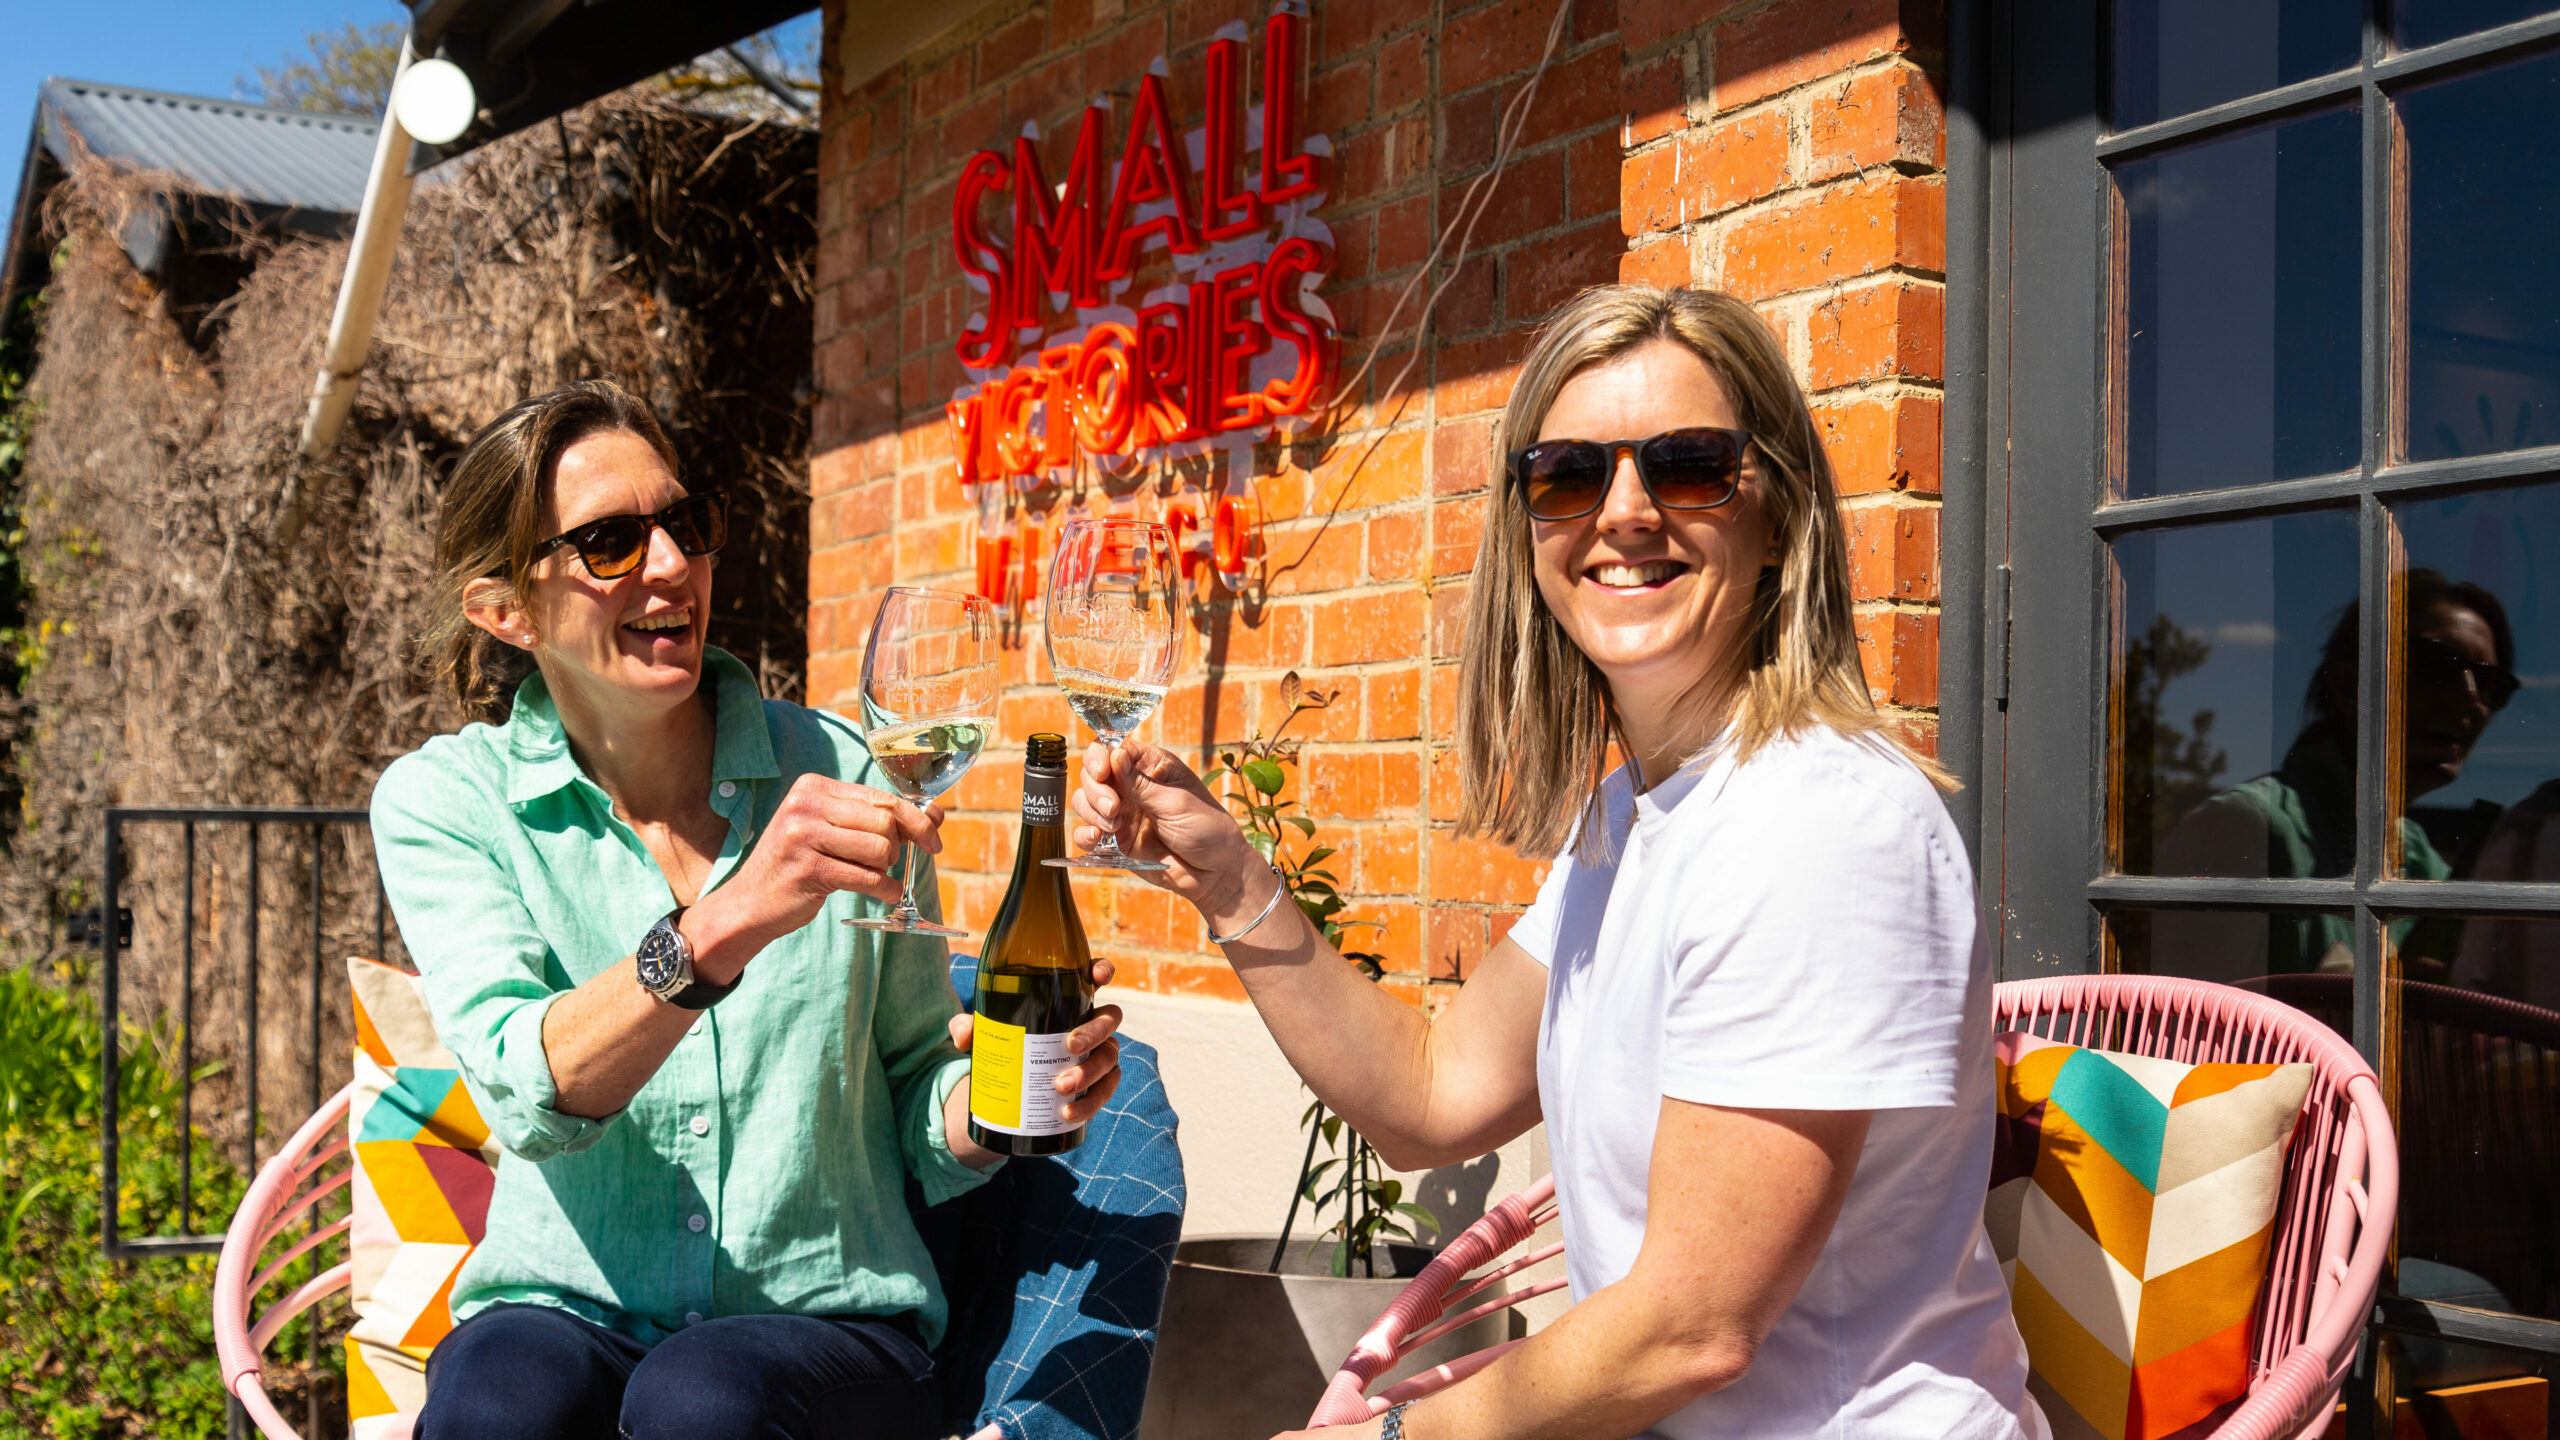 Jules Ashmead and Bec Ashmead in front of Small Victories cellar door cheers